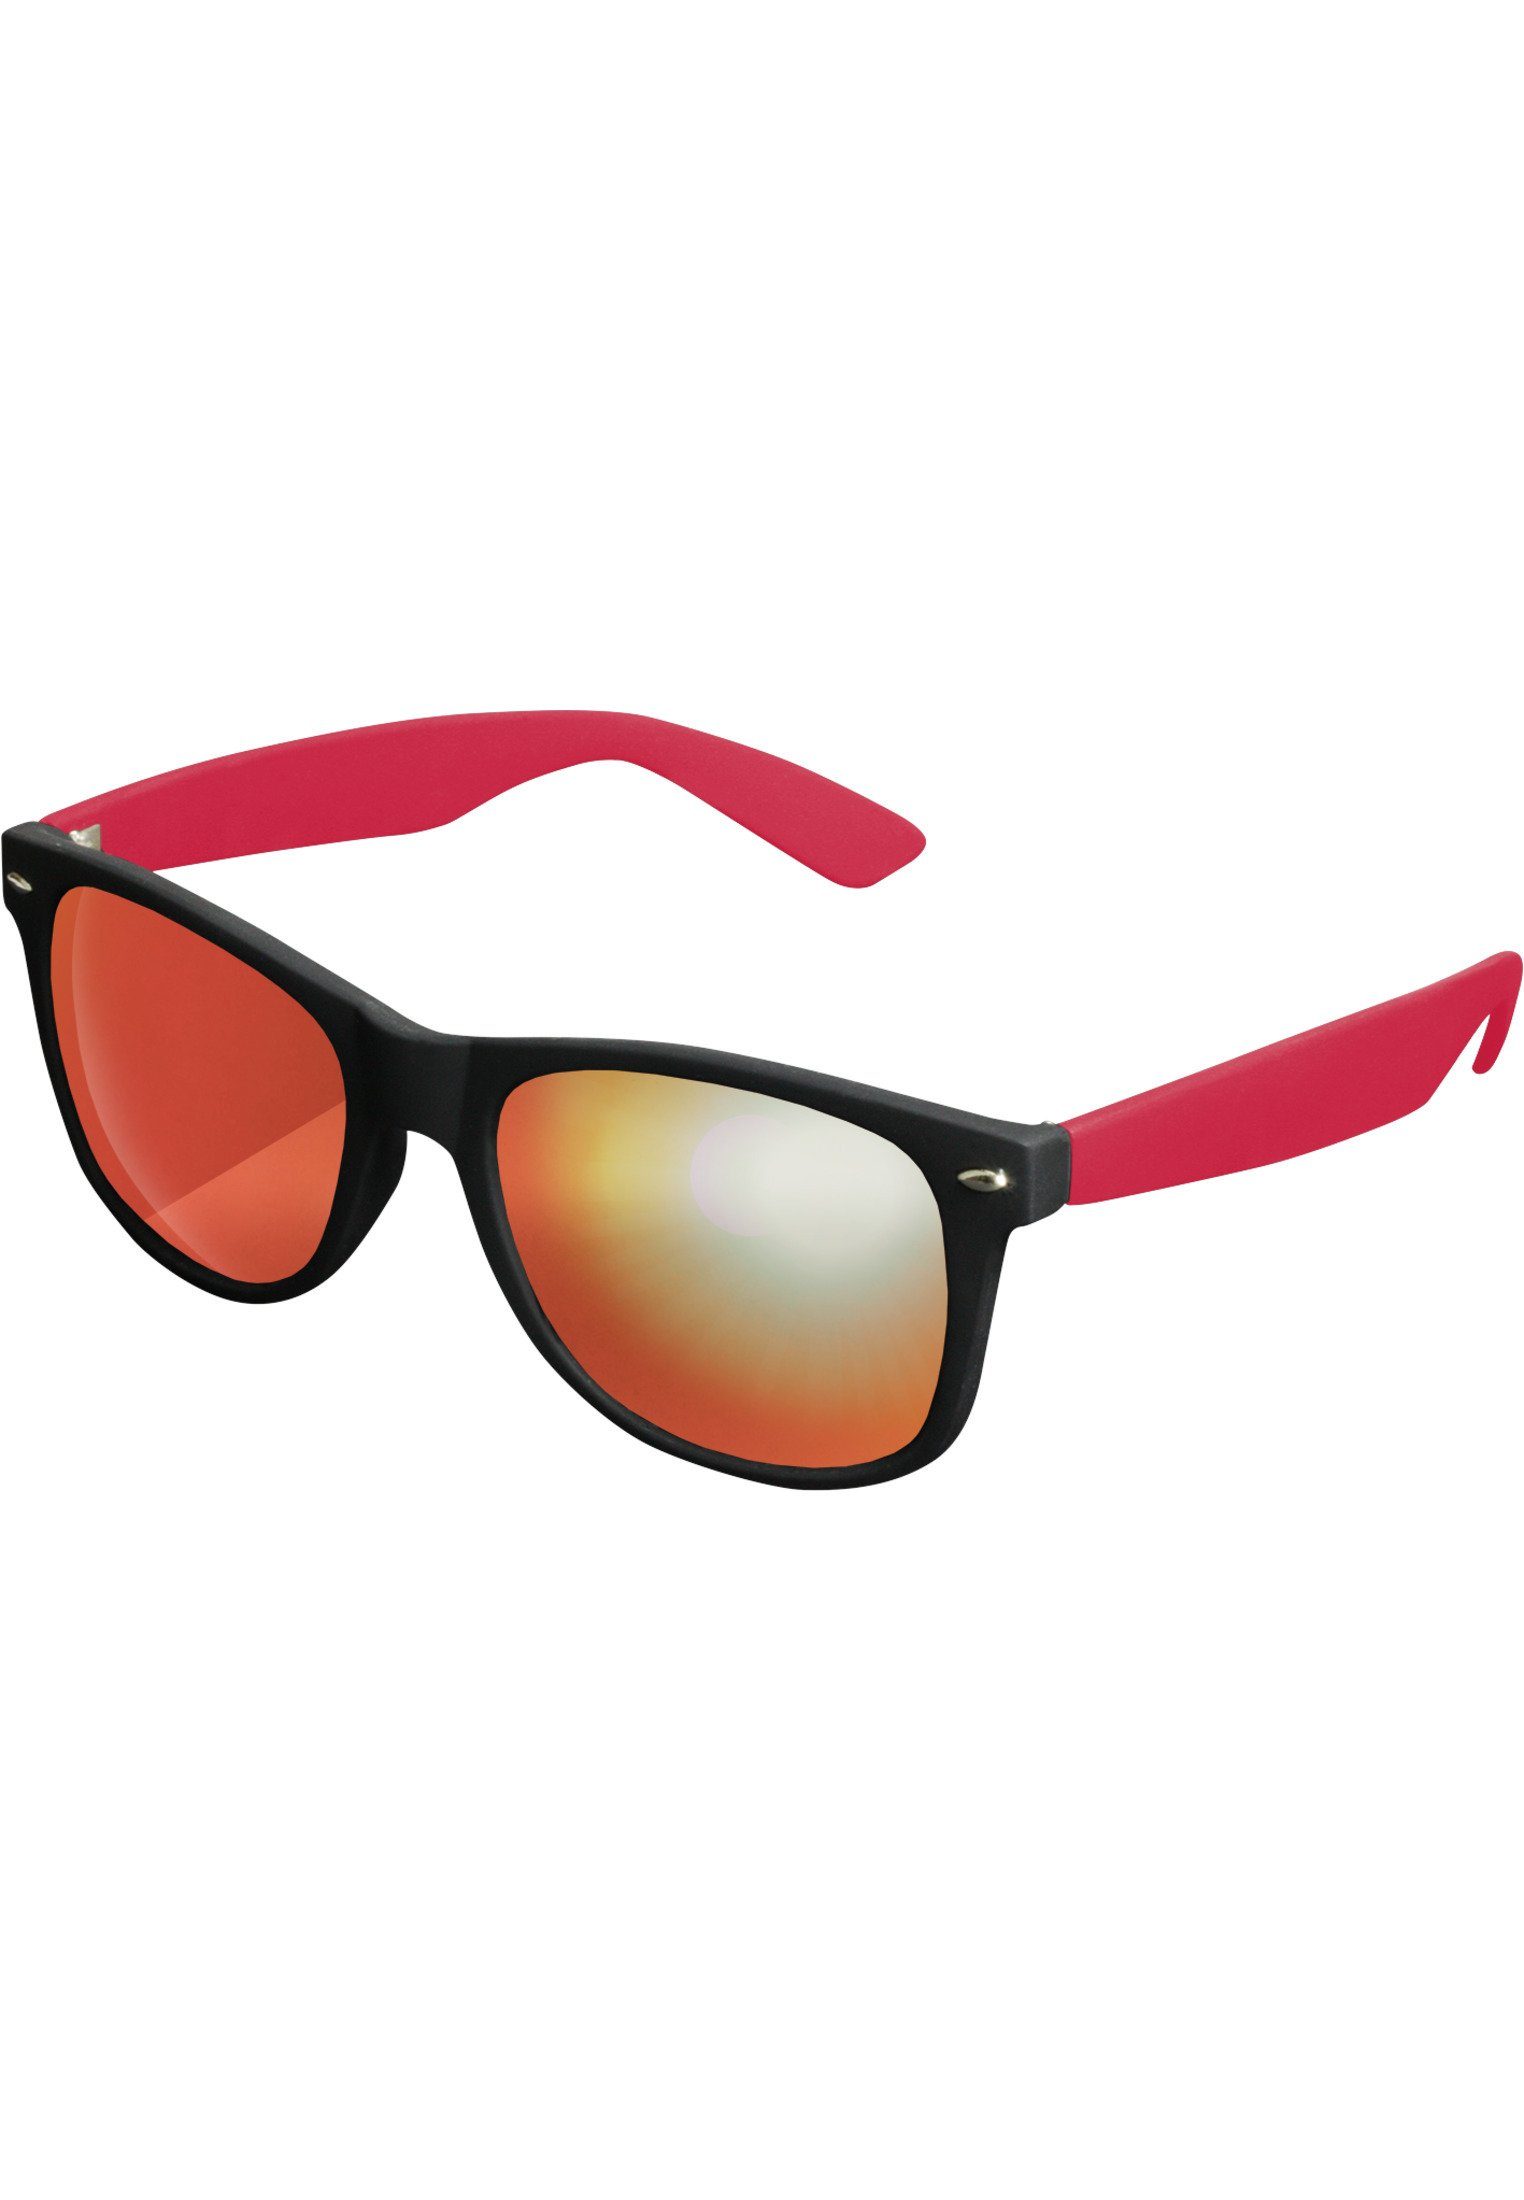 Accessoires MSTRDS Sunglasses Likoma Sonnenbrille Mirror blk/red/red